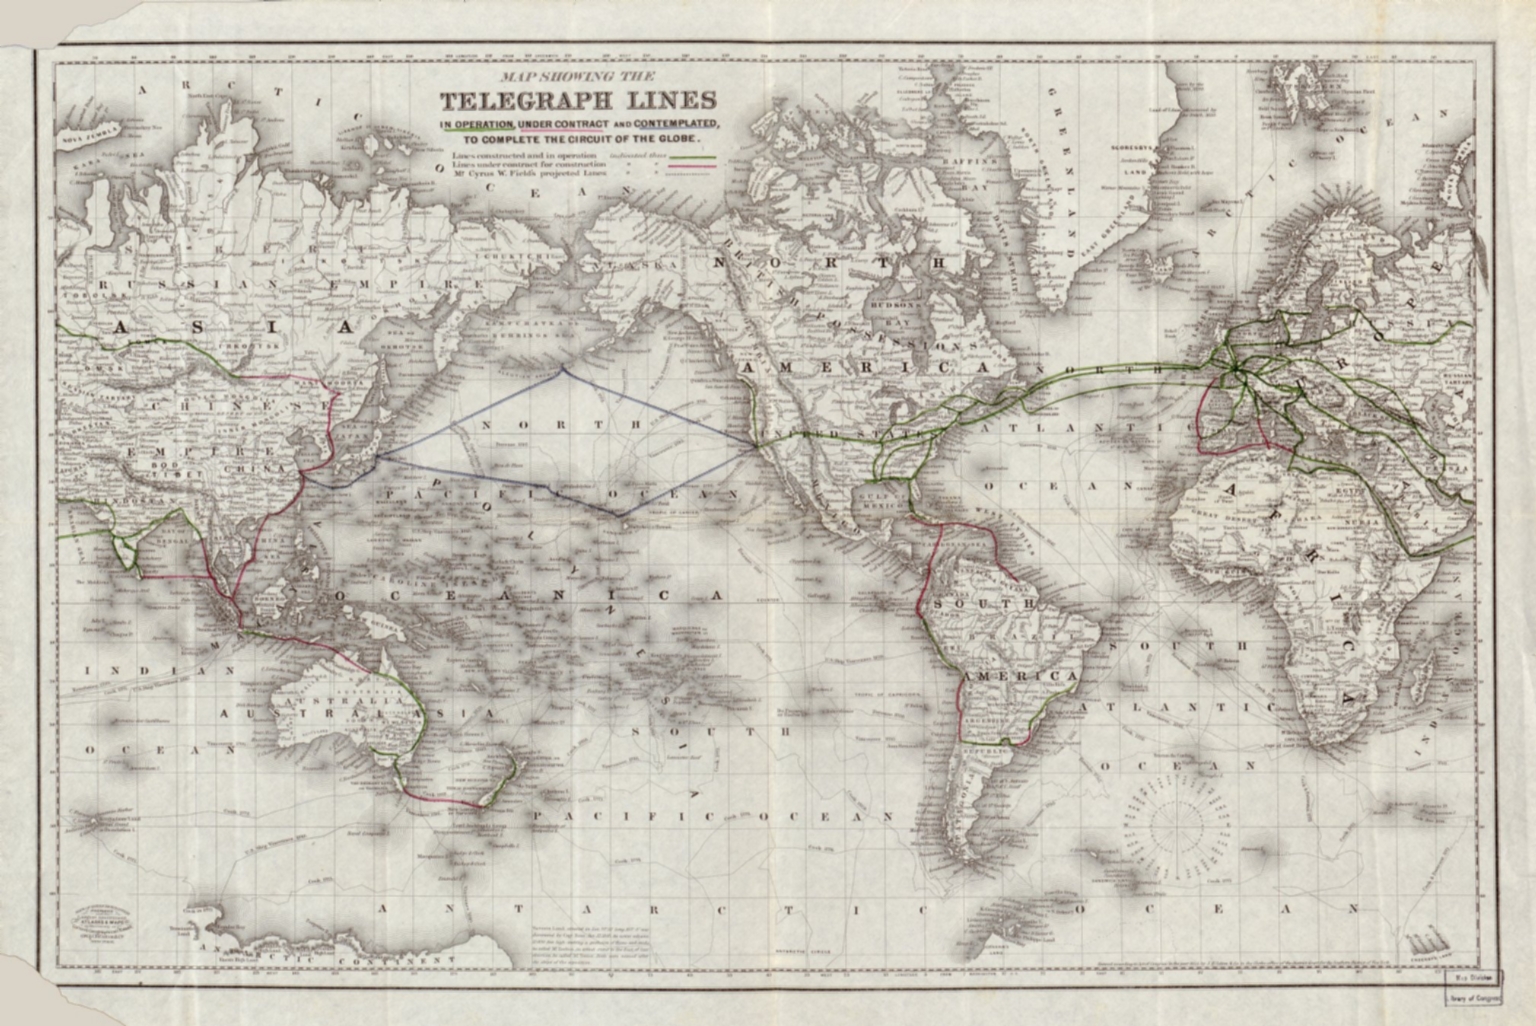 Map showing the telegraph lines in operation, under contract and contemplated, to complete the circuit of the globe